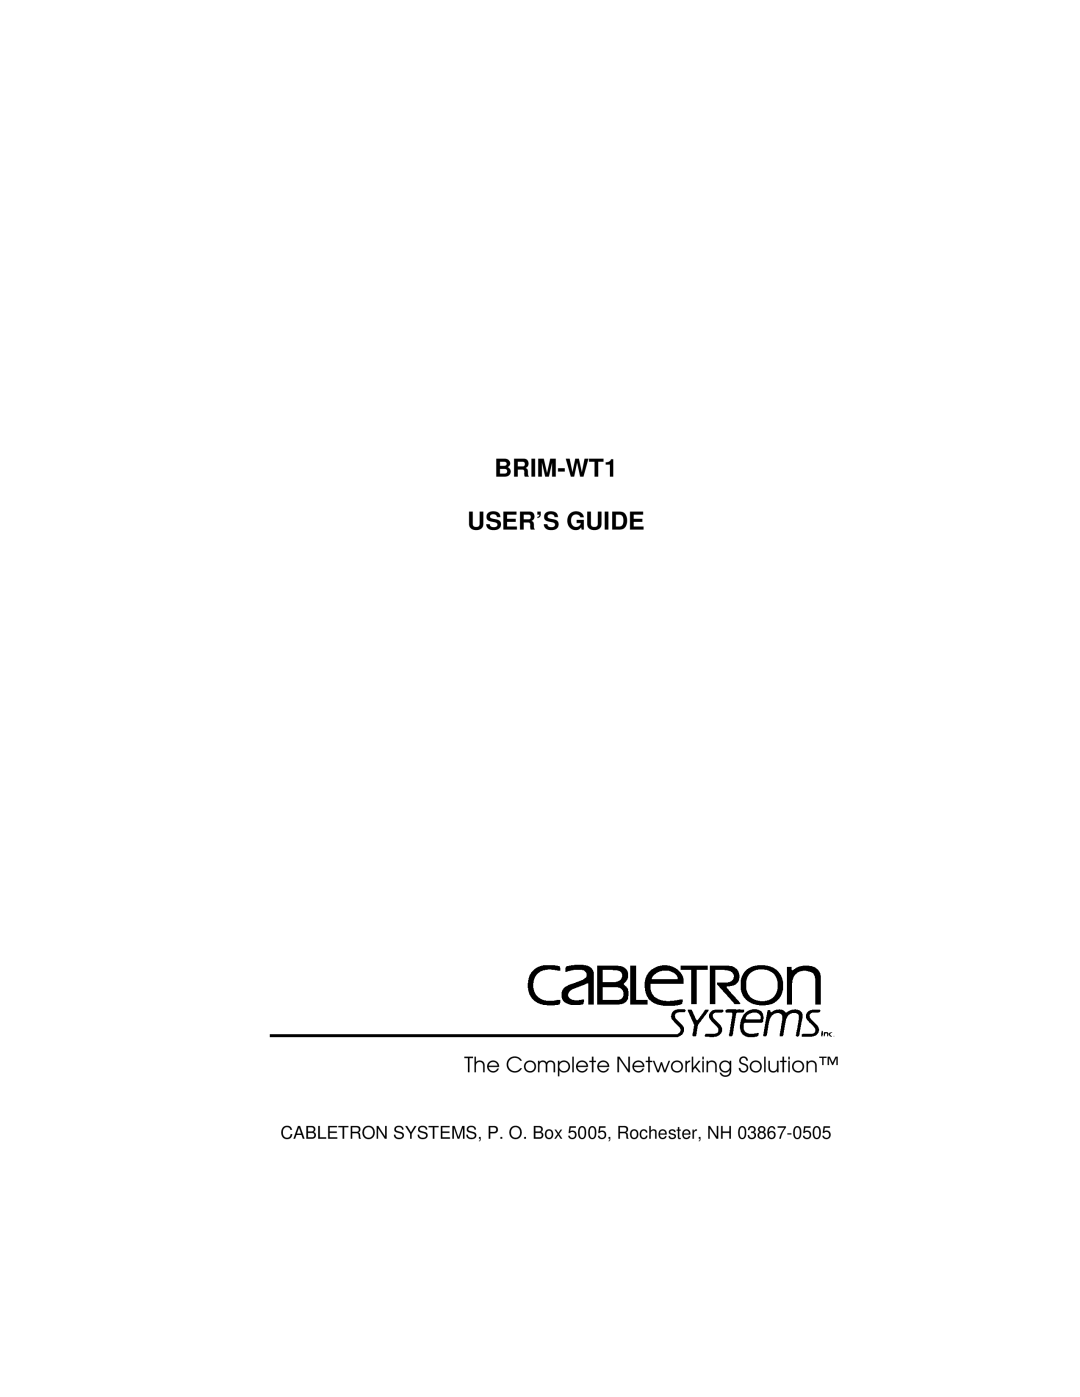 Cabletron Systems manual BRIM-WT1 USER’S GUIDE, The Complete Networking Solution 